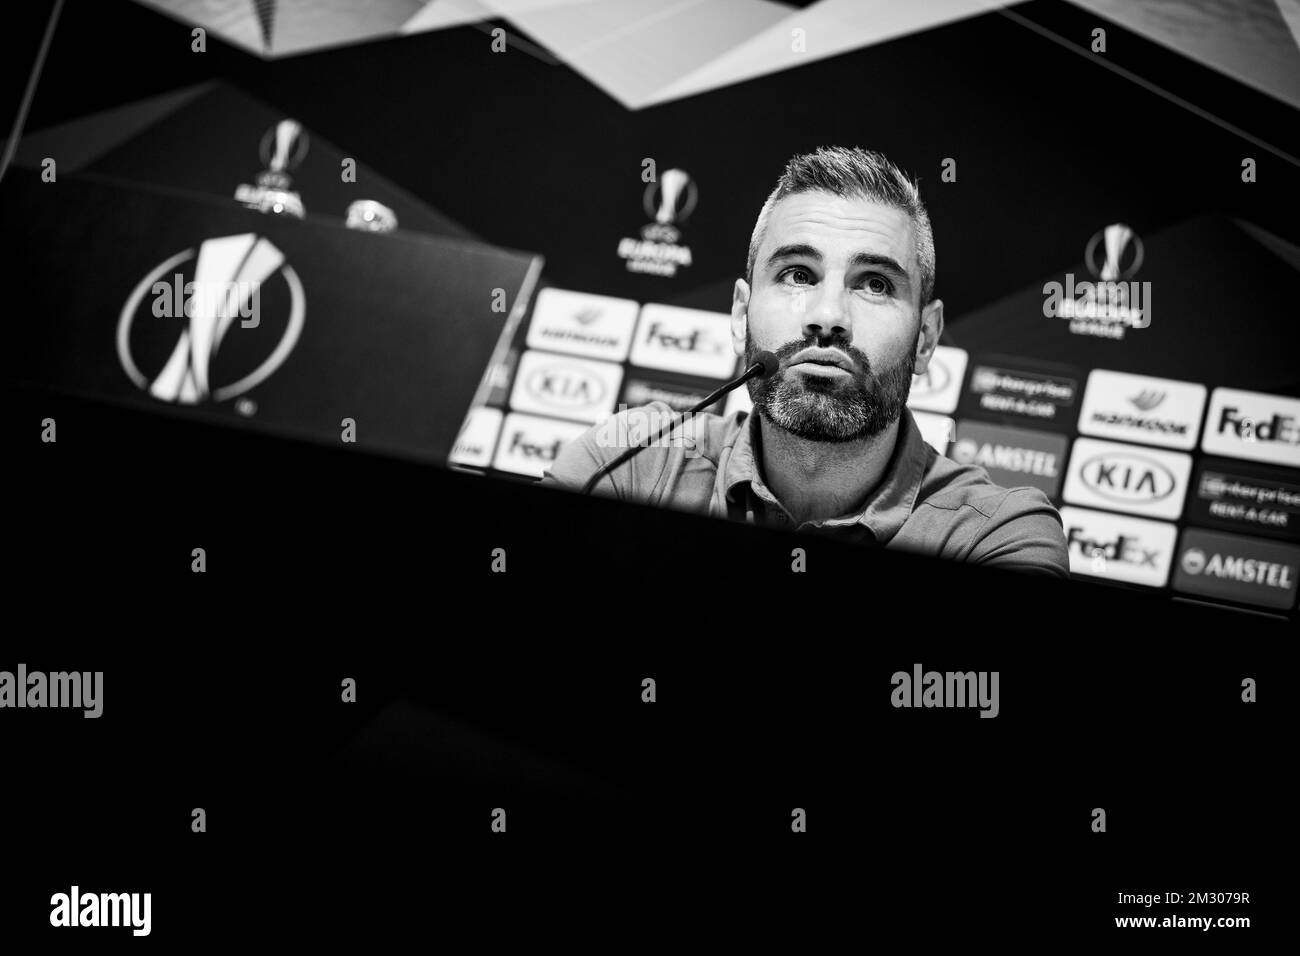 Saint-Etienne's Loic Perrin pictured during a press conference of French team AS Saint-Etienne, Wednesday 18 September 2019 in Gent. Tomorrow Saint-Etienne will meet Belgian soccer club KAA Gent in the group stage of the UEFA Europa League. BELGA PHOTO JASPER JACOBS Stock Photo